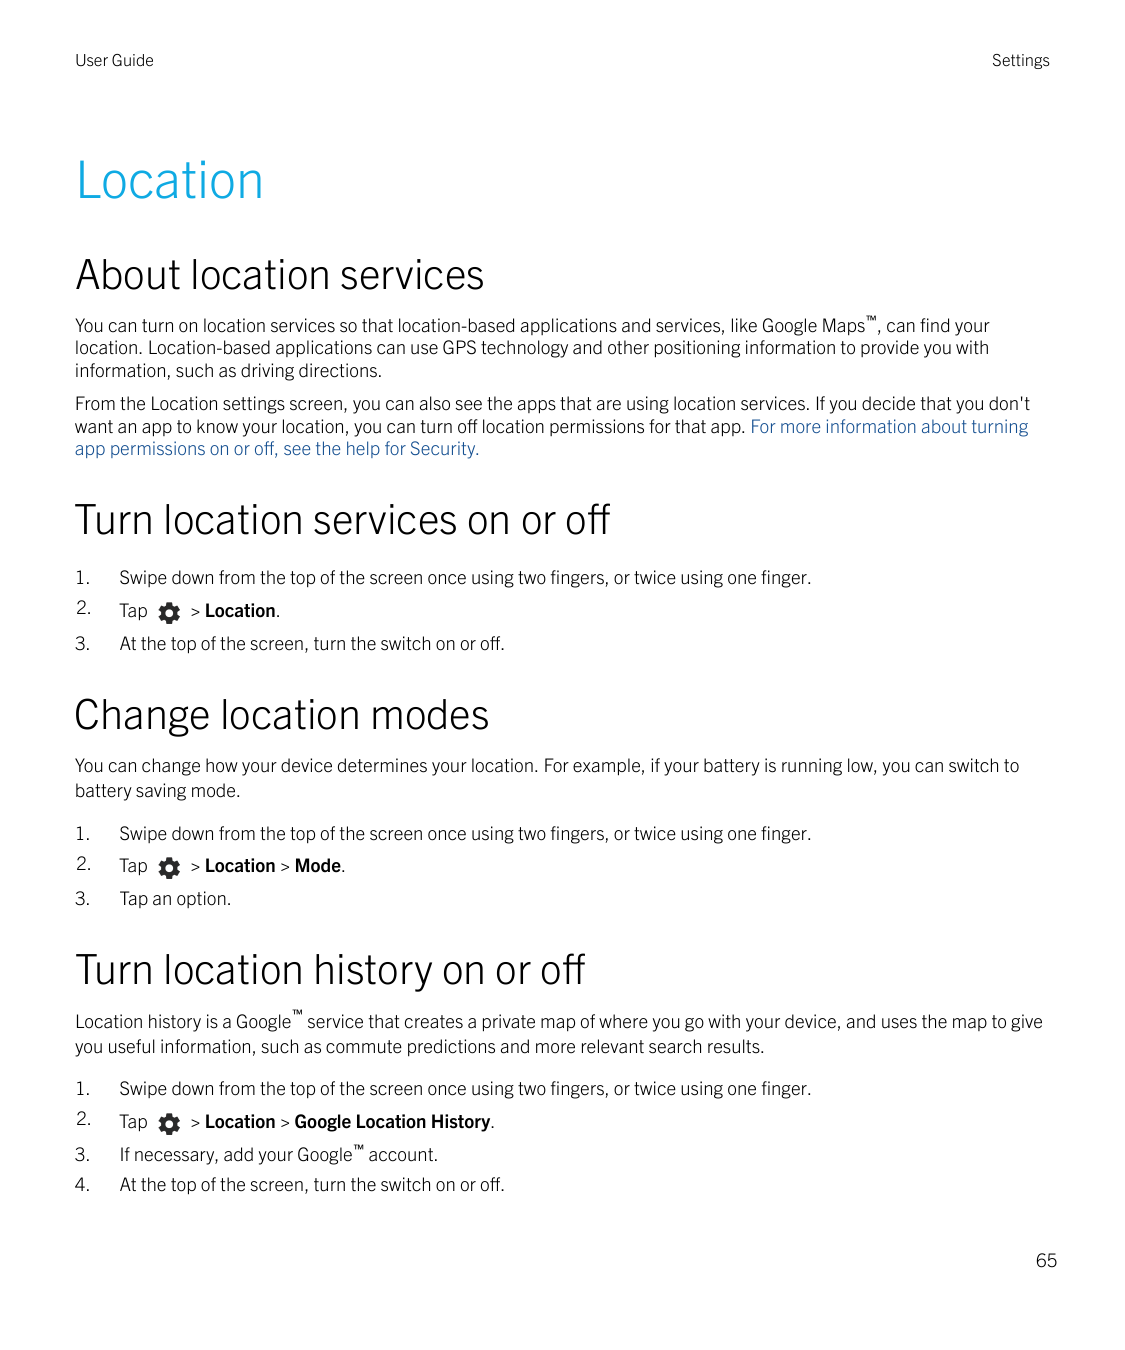 User GuideSettingsLocationAbout location servicesYou can turn on location services so that location-based applications and servi